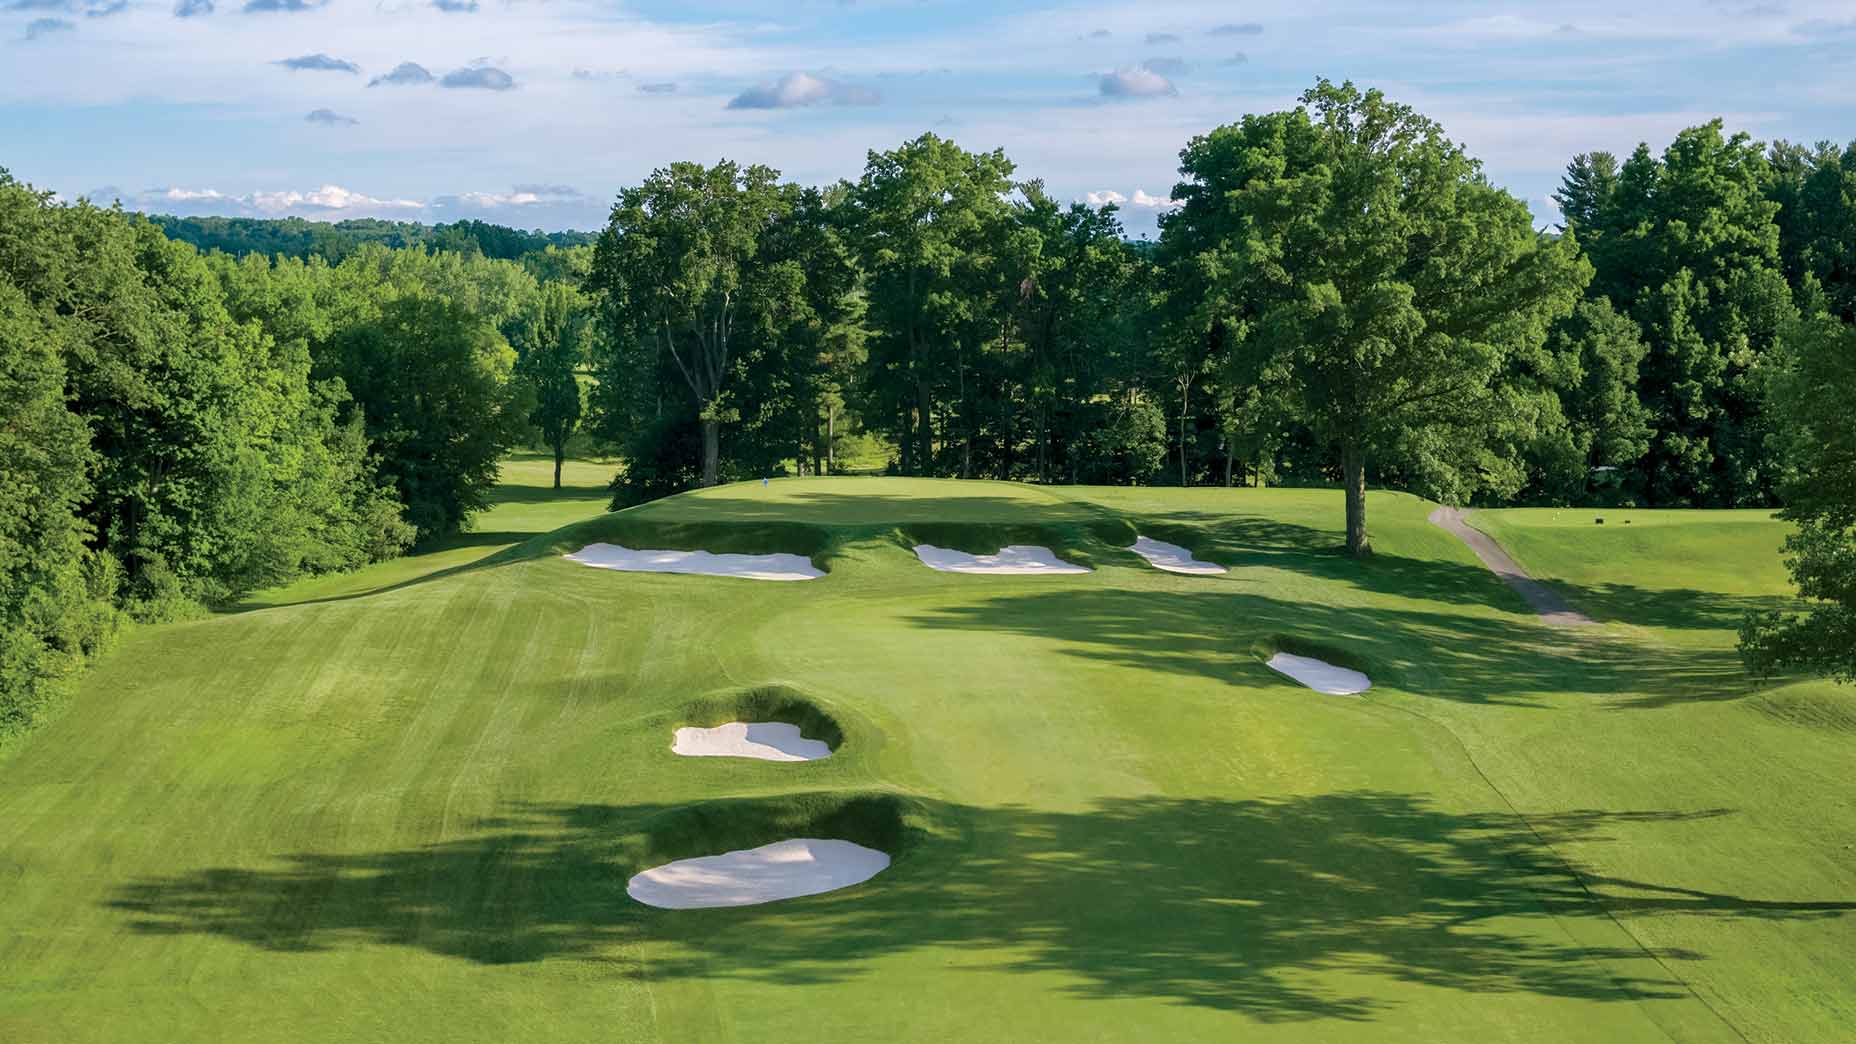 2023 PGA Championship Revamped Oak Hill takes center stage